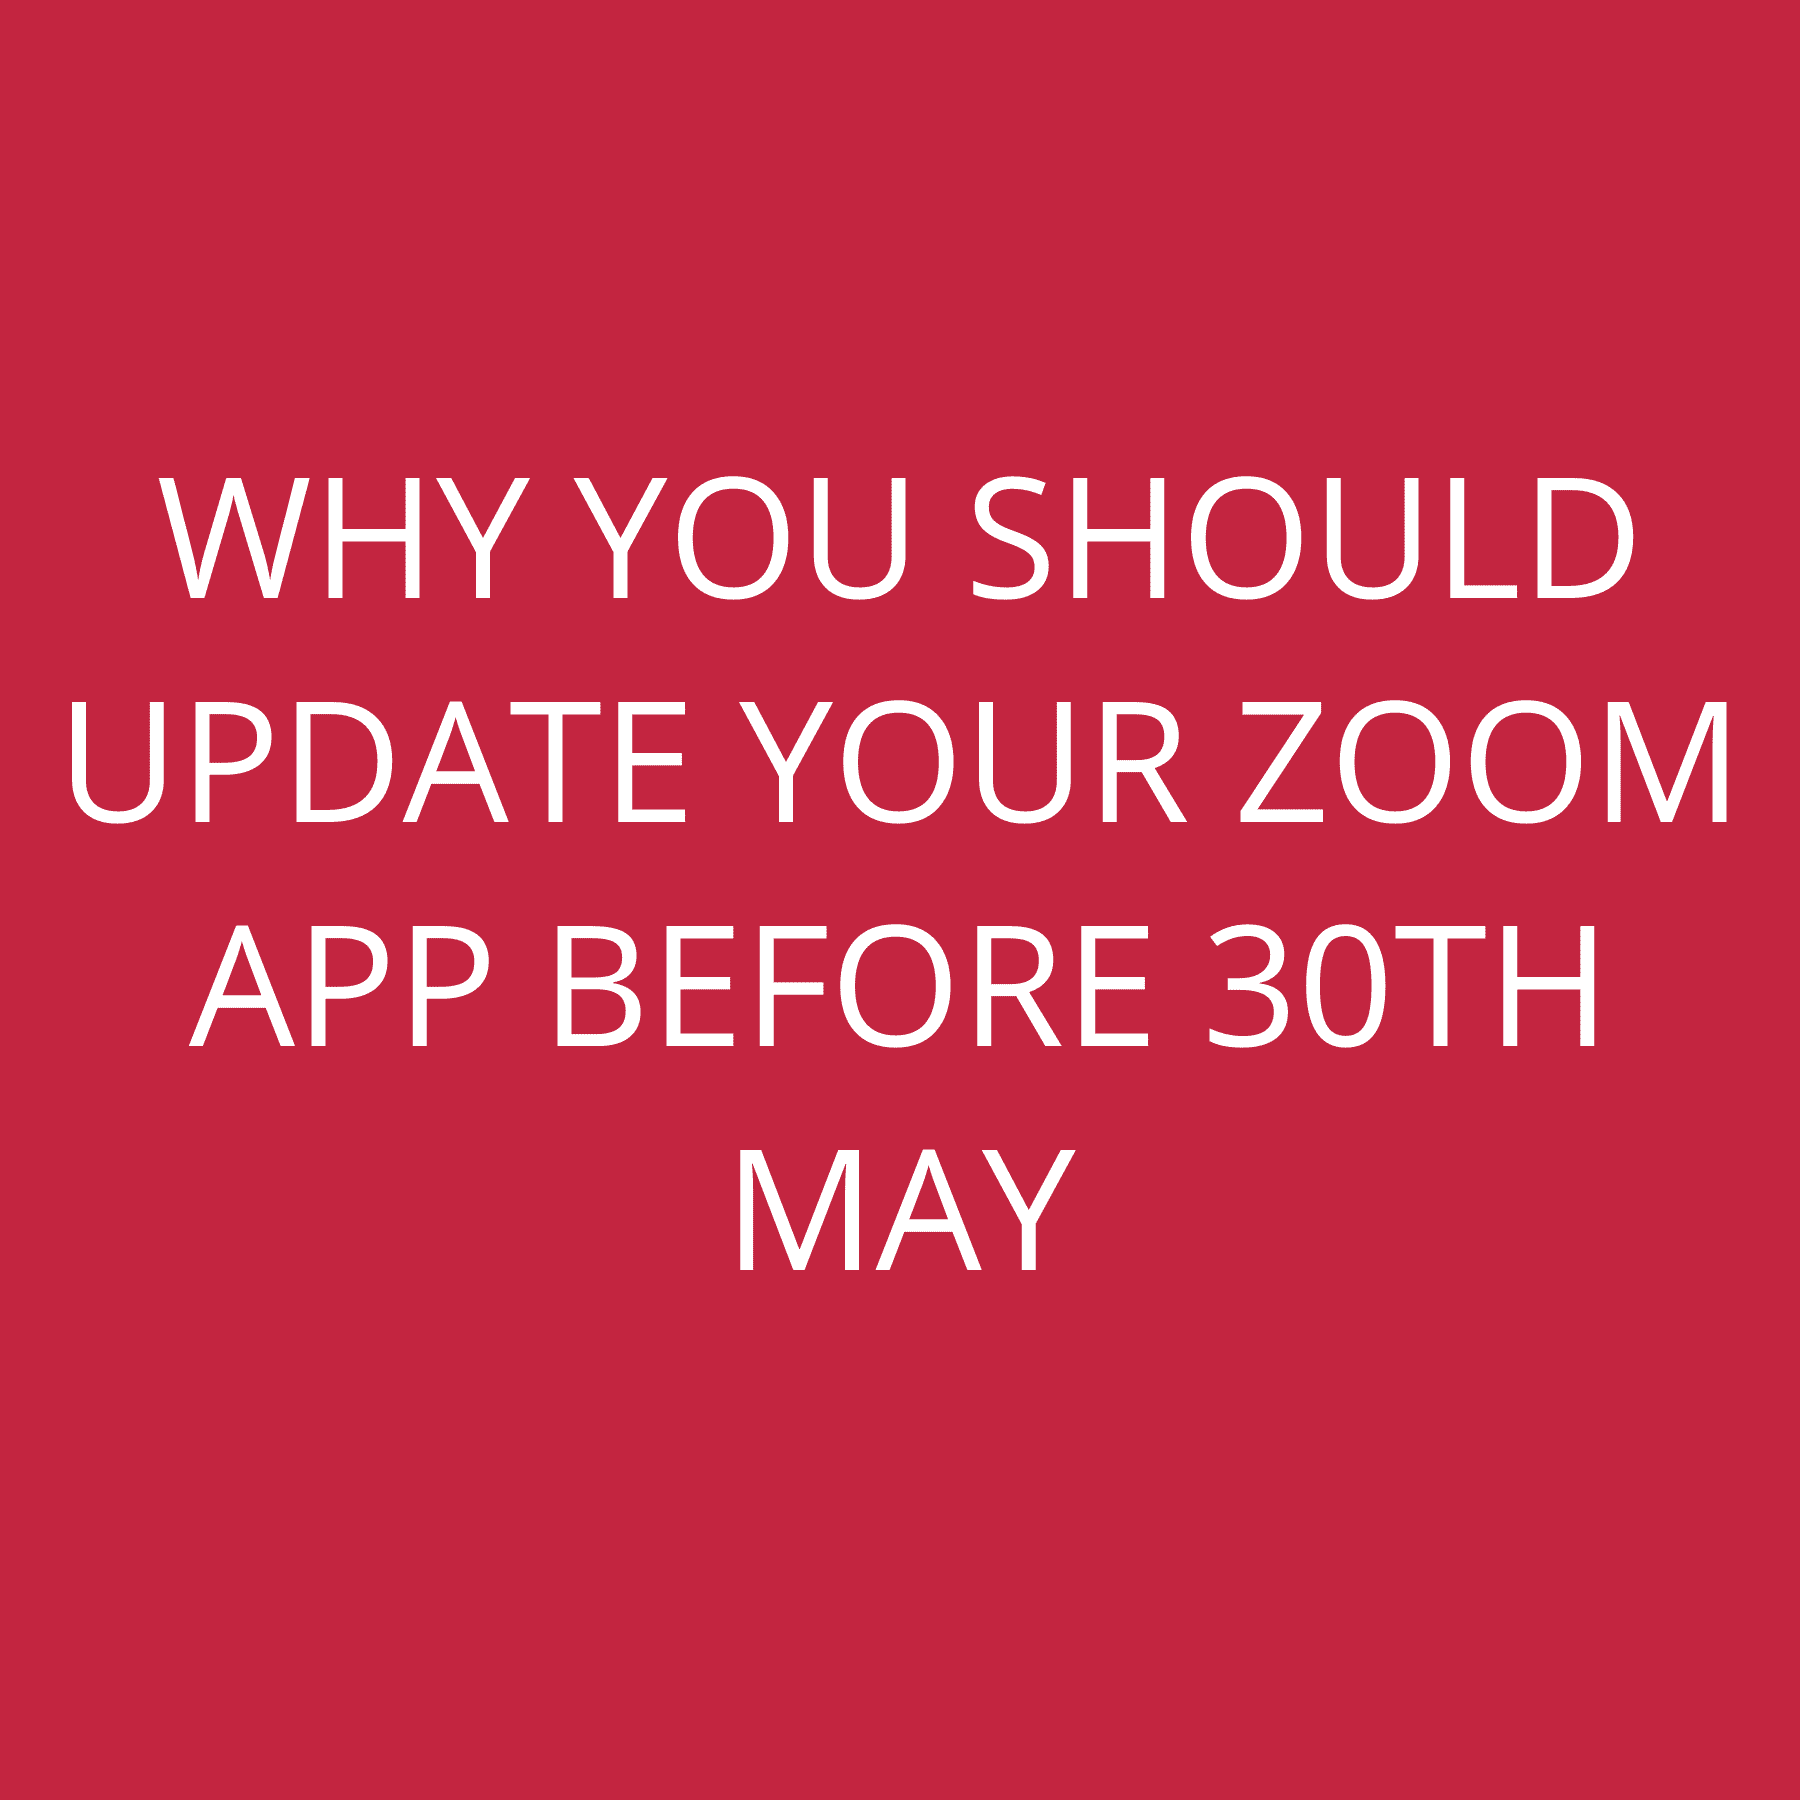 Why you should update your Zoom App before 30th May